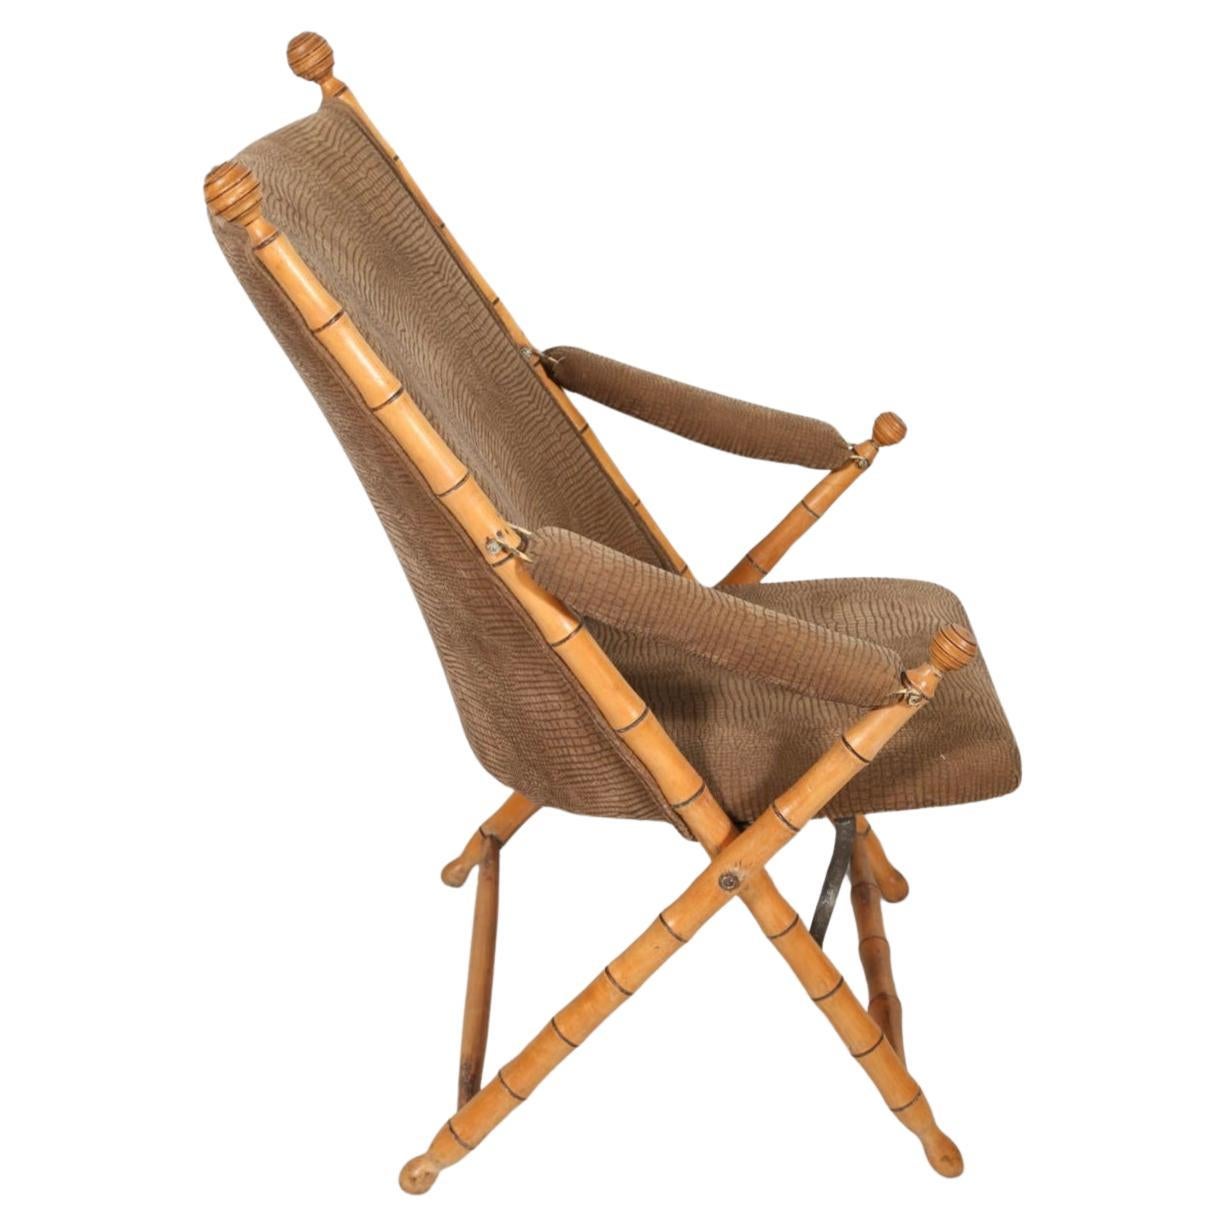  Pair of Antique Faux Bamboo Folding Campaign Lounge Chairs In Good Condition For Sale In Bradenton, FL